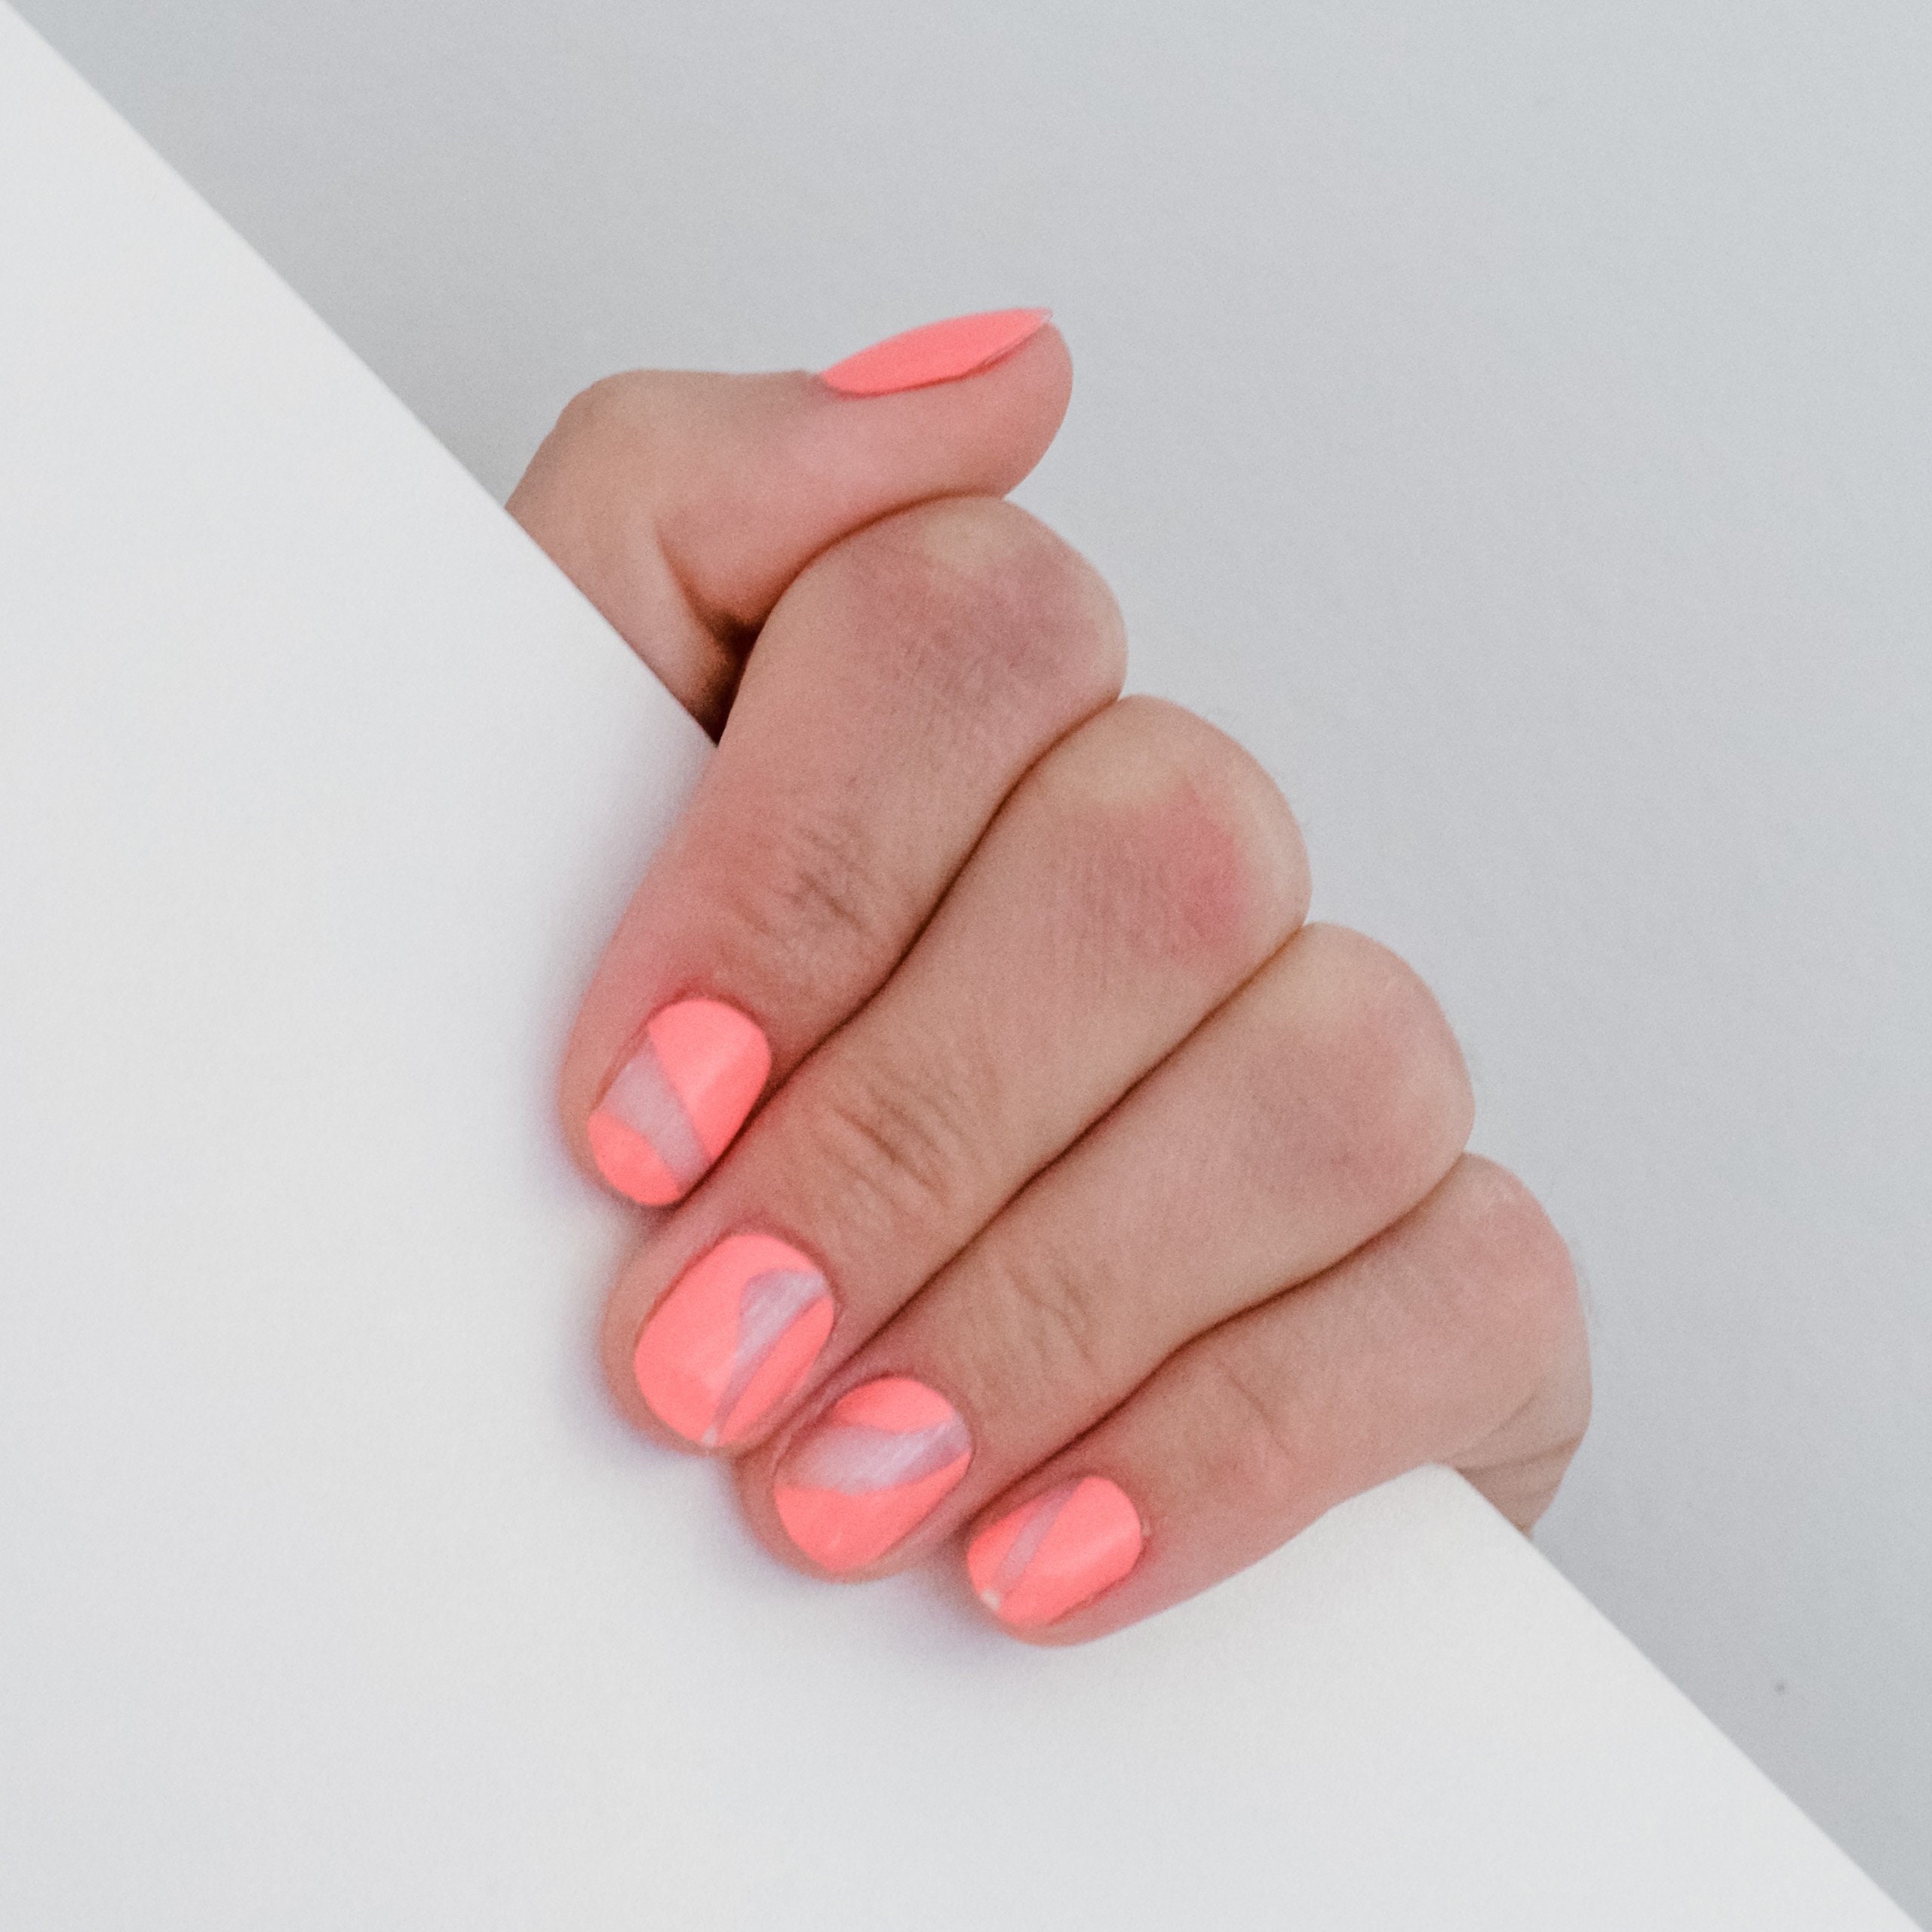 Coral Nail Designs: 45 Trendiest Looks and Colors | Coral nails with  design, Beige nails, Coral nails